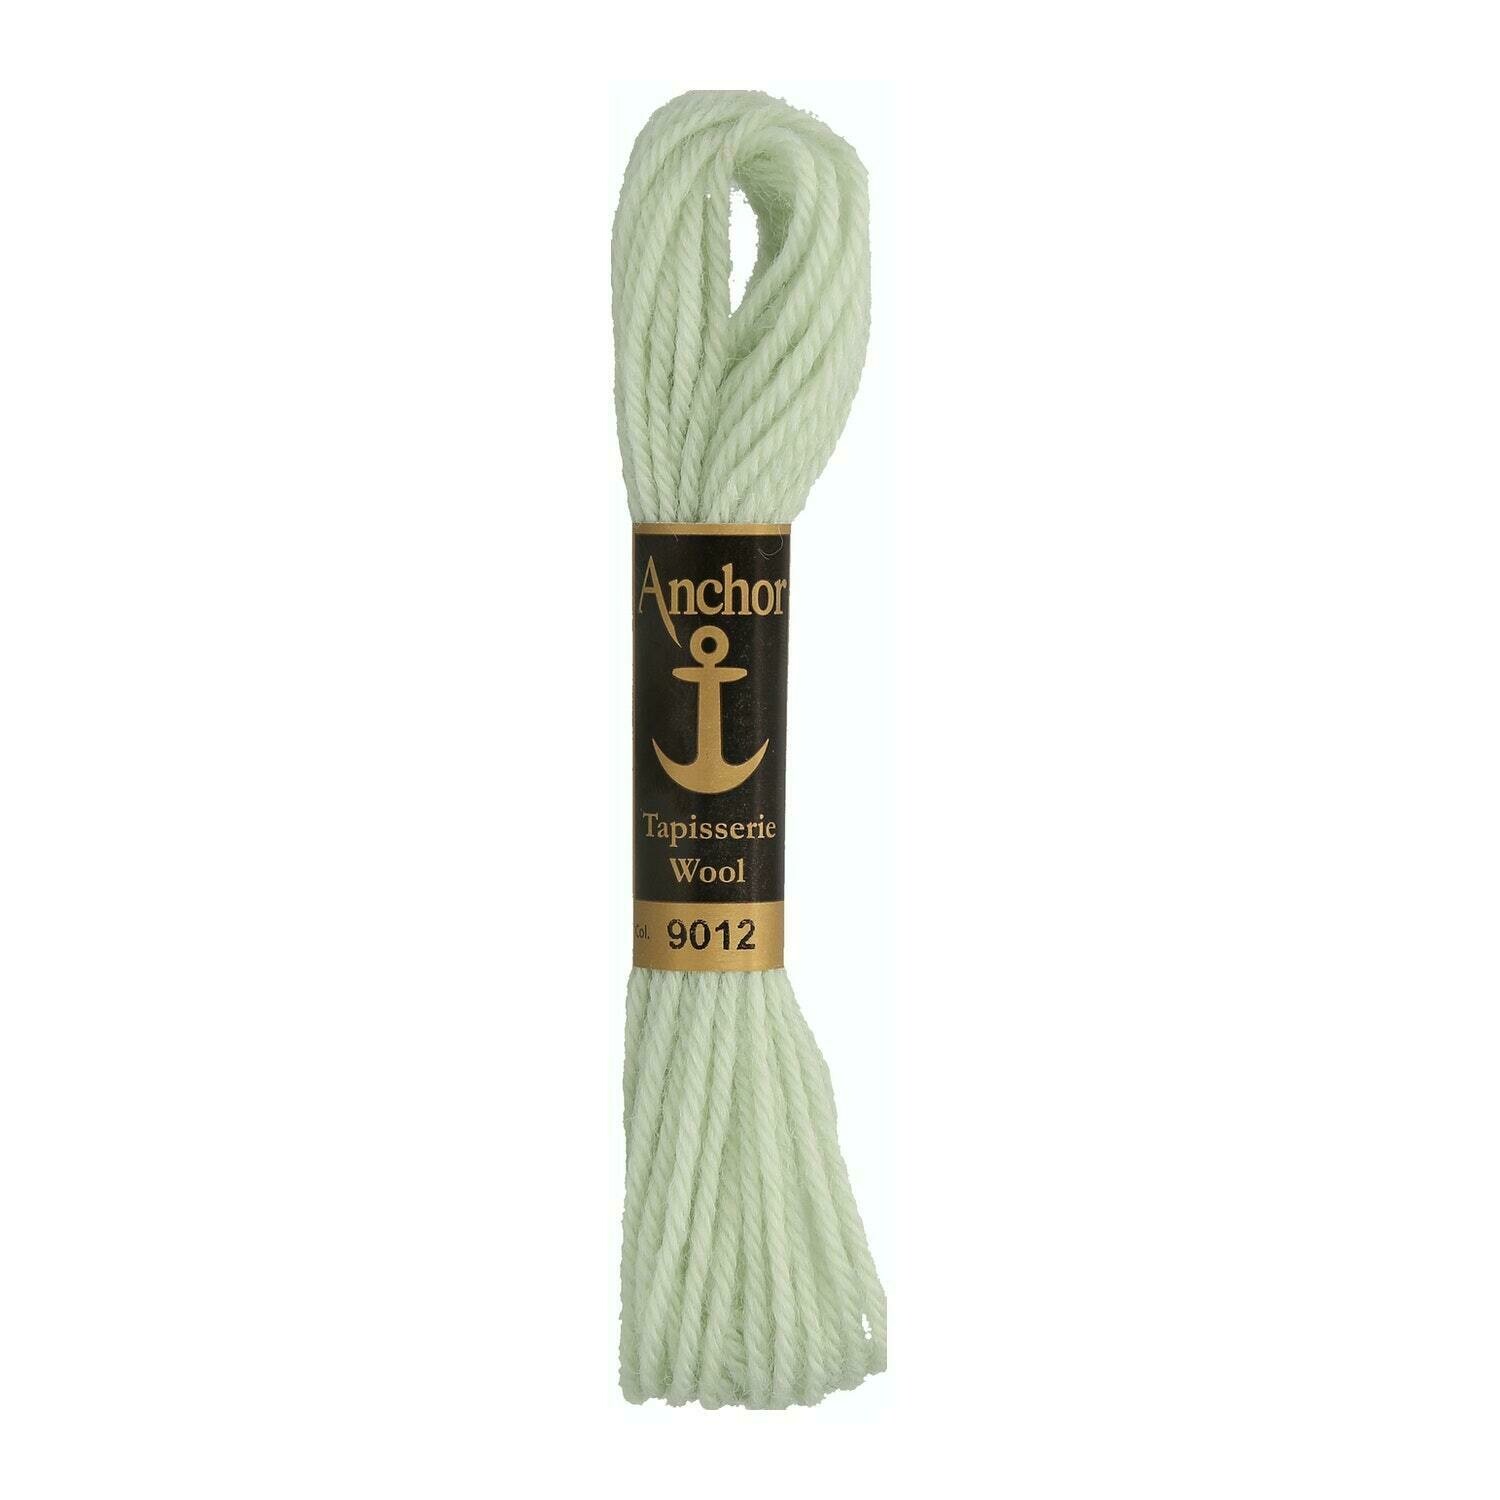 Anchor Tapisserie Wool #09012